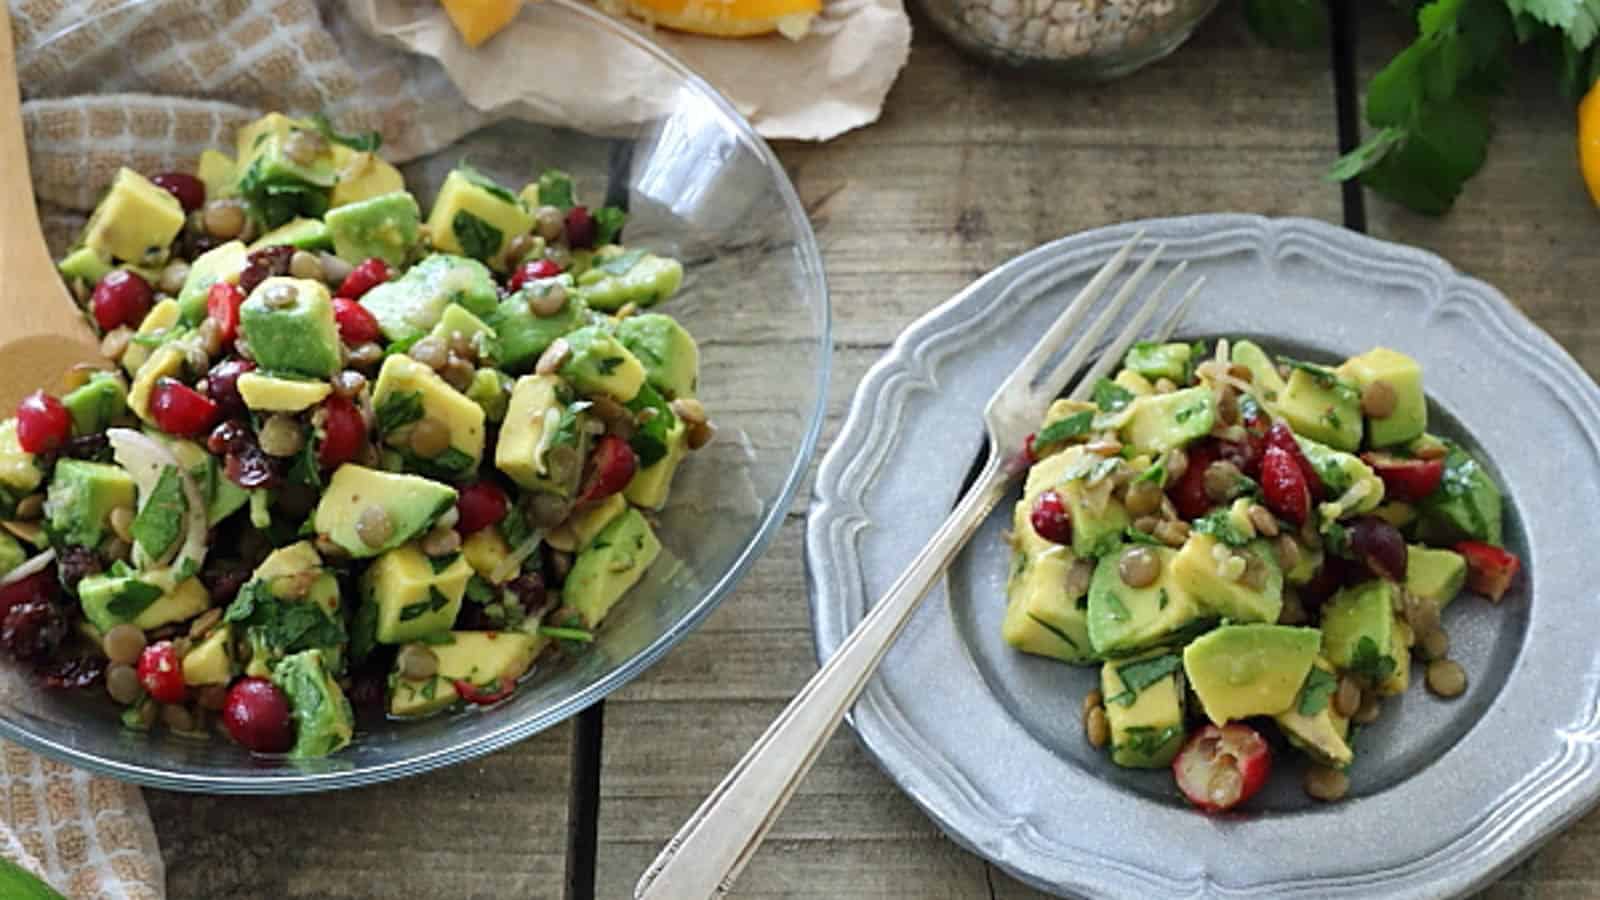 Avocado lentil salad in a bowl with serving spoon and silver plate with fork.